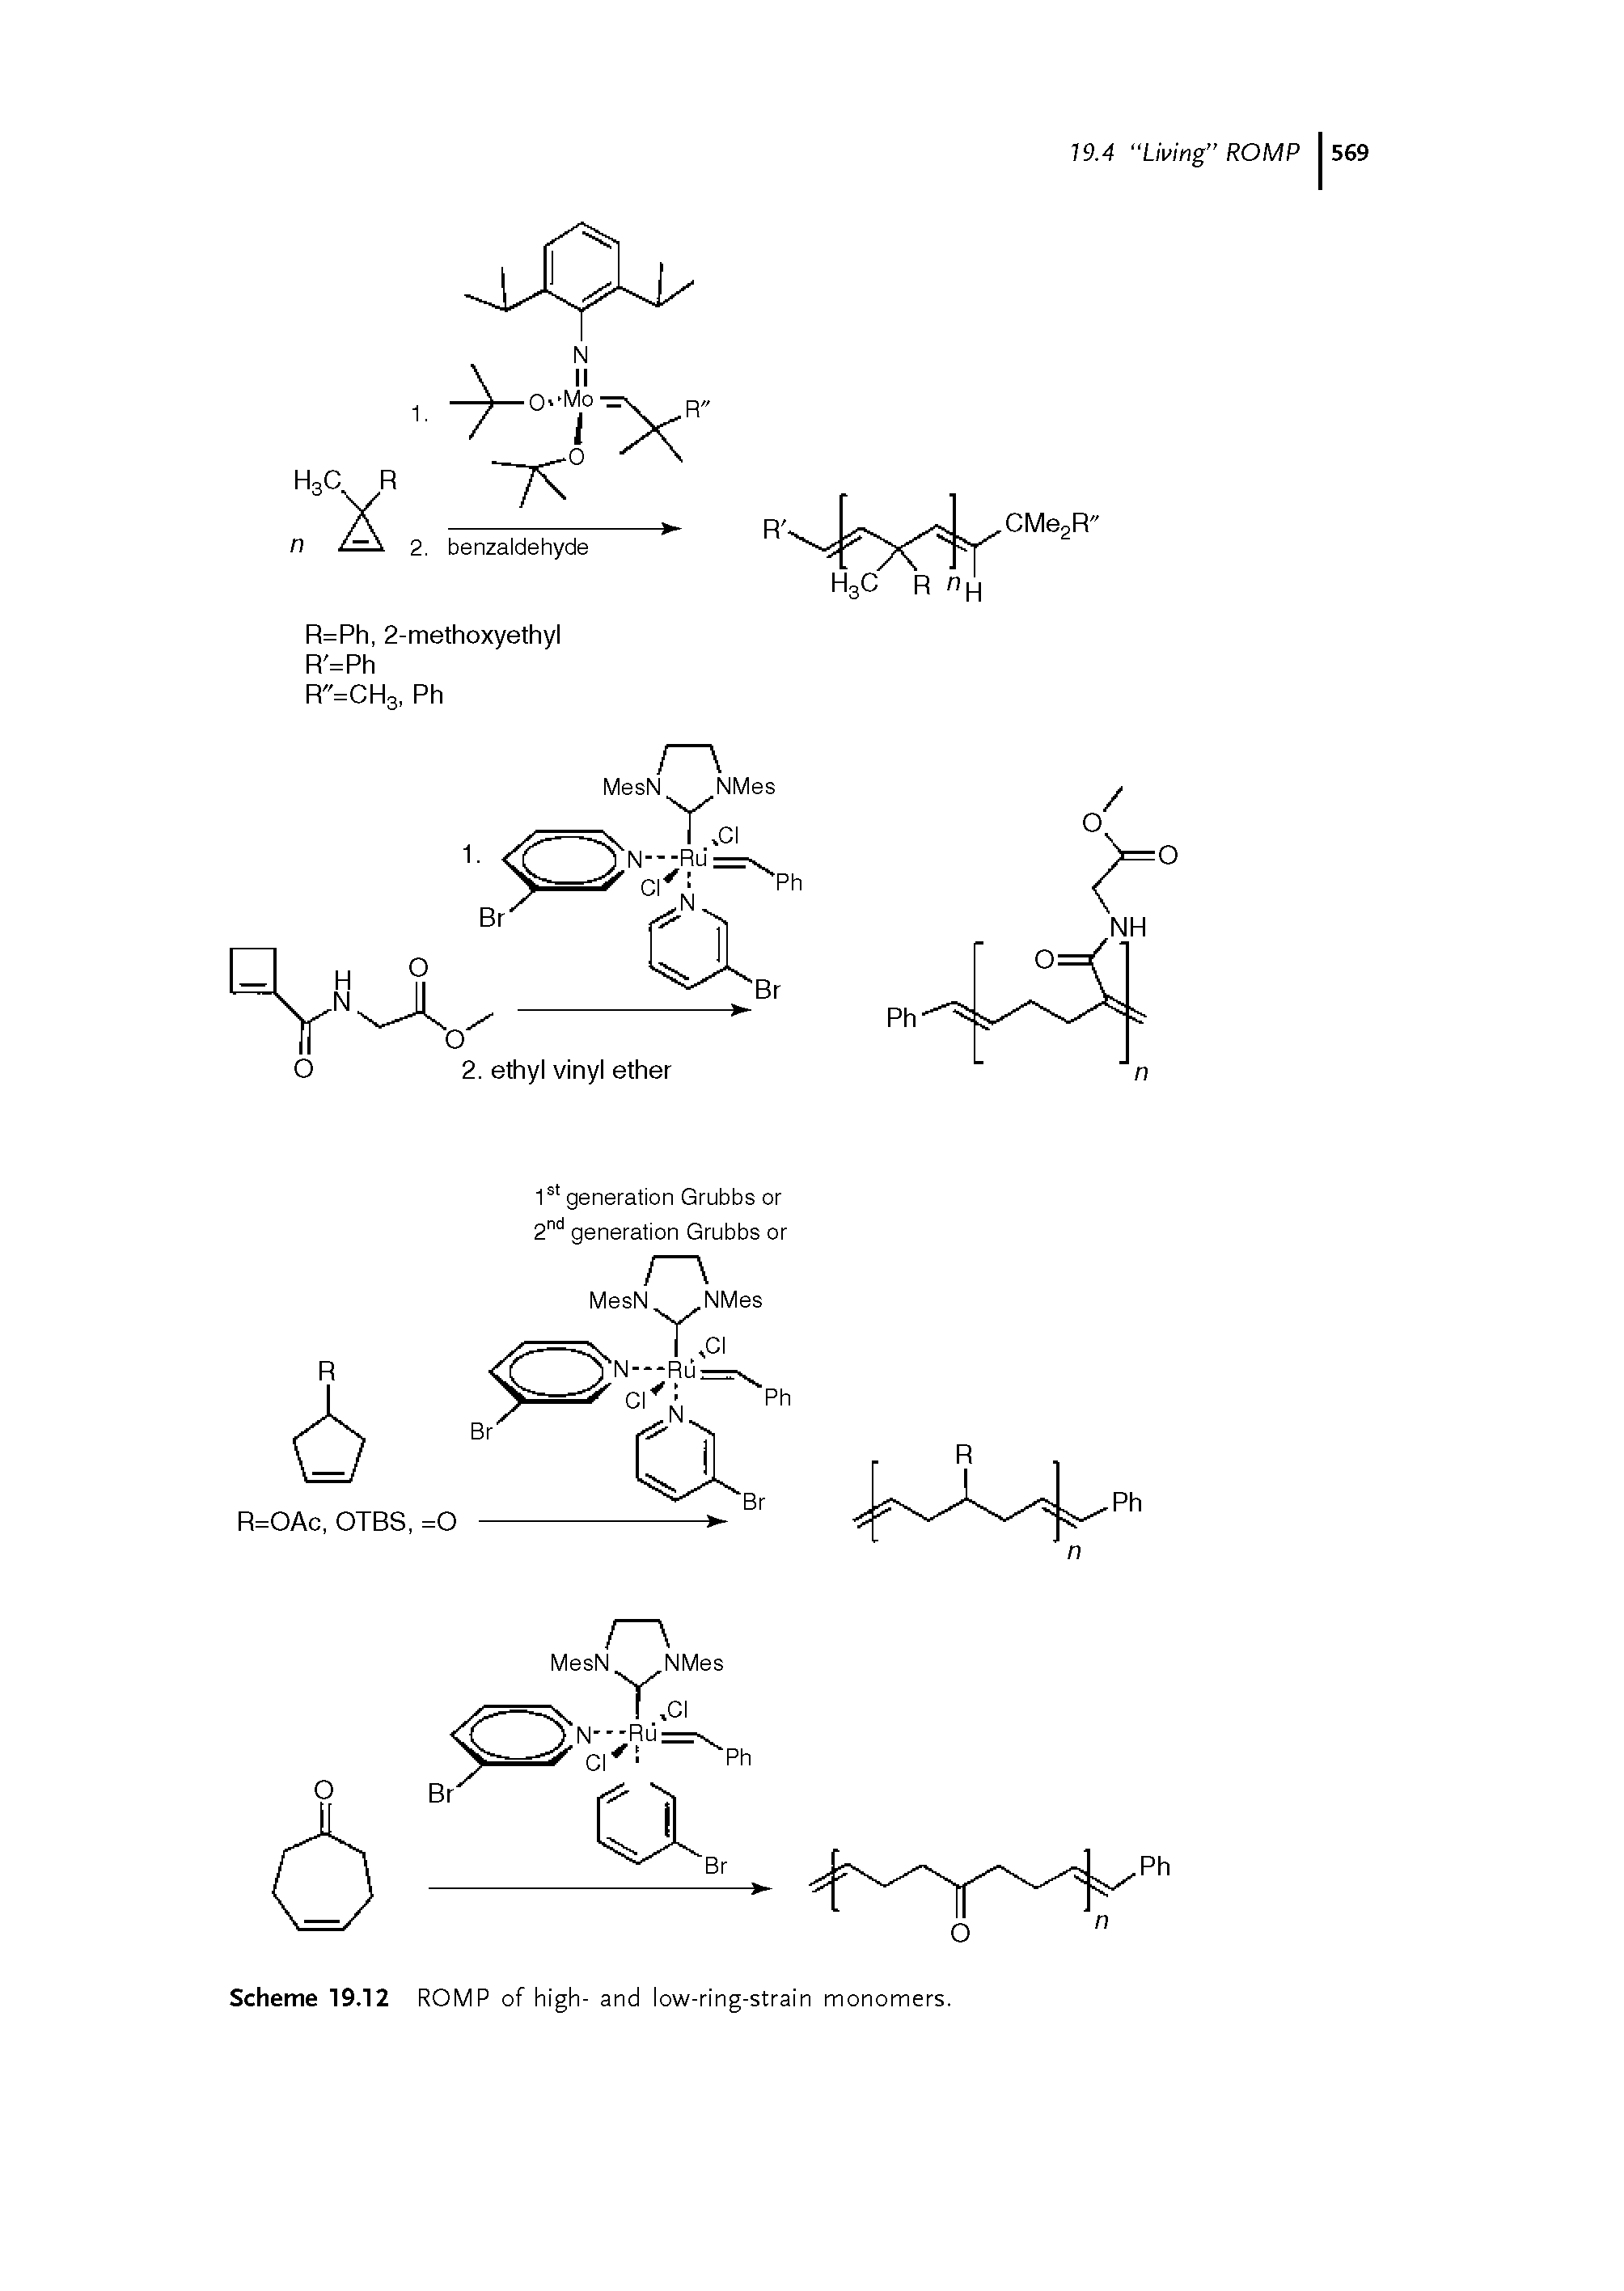 Scheme 19.12 ROMP of high- and low-ring-strain monomers.